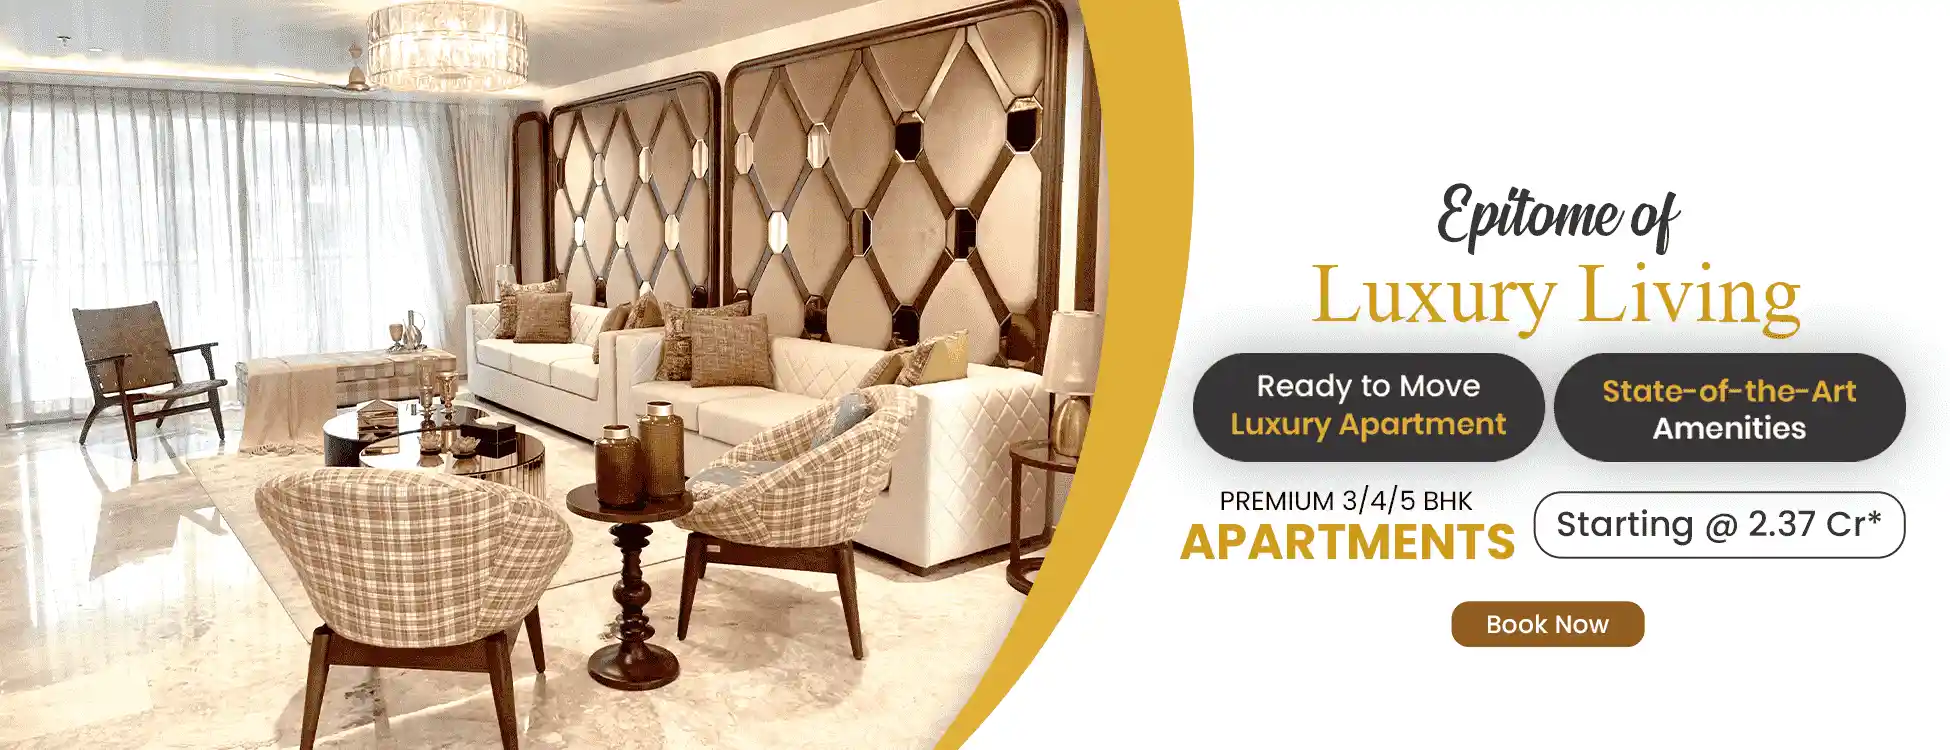 Manglam Radiance - Luxurious apartments in Jaipur